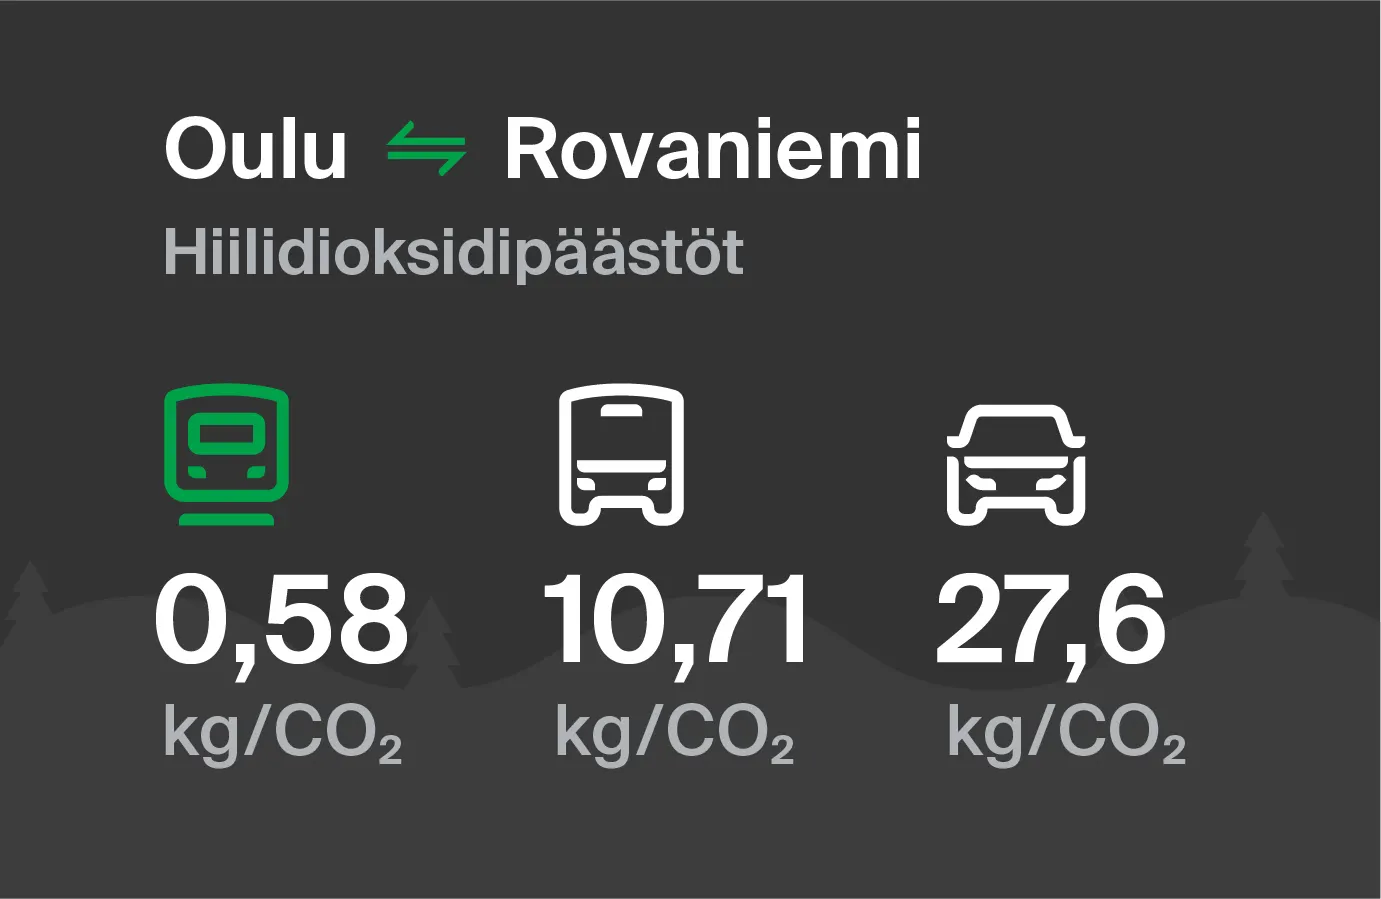 Carbon dioxide emissions from Oulu to Rovaniemi by different modes of transport: by train 0.58 kg/CO2, by bus 10.71 kg/CO2 and by car 27.6 kg/CO2.